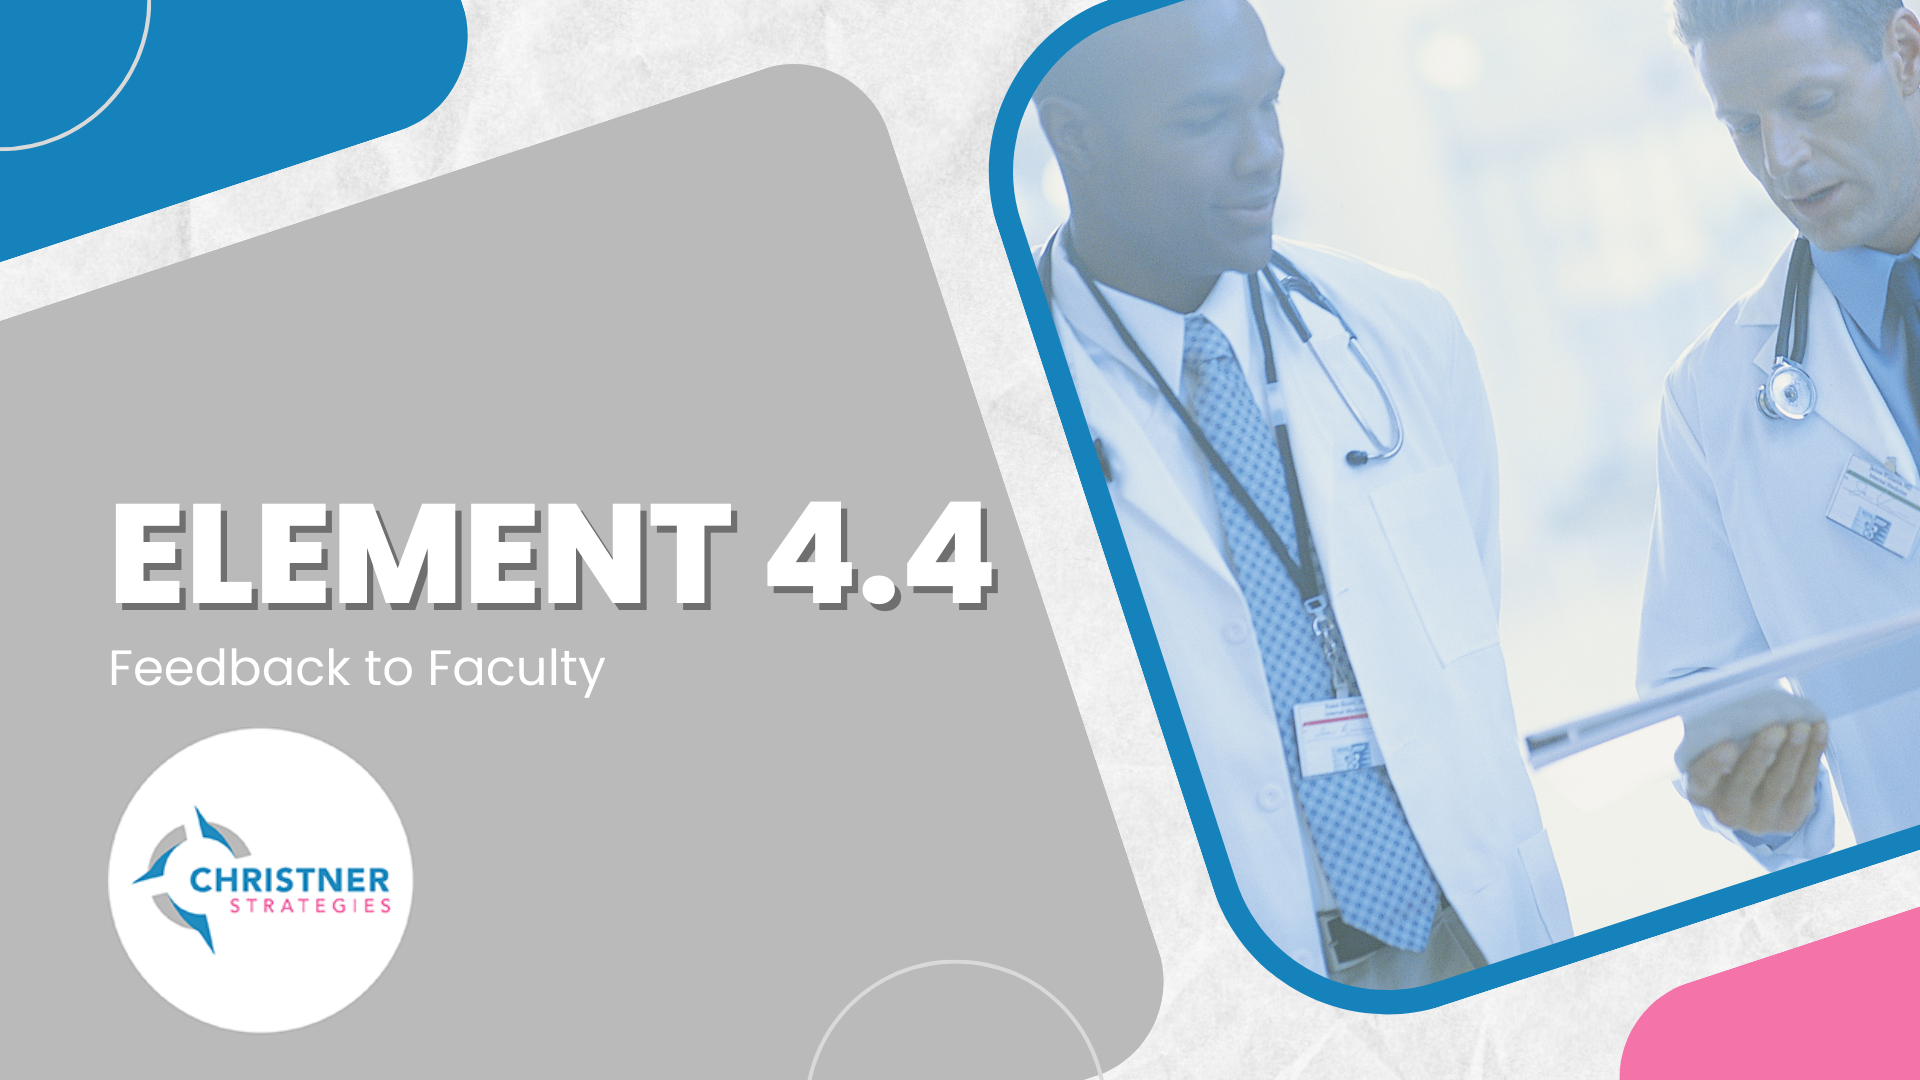 LCME Element 4.4 - Feedback to Faculty